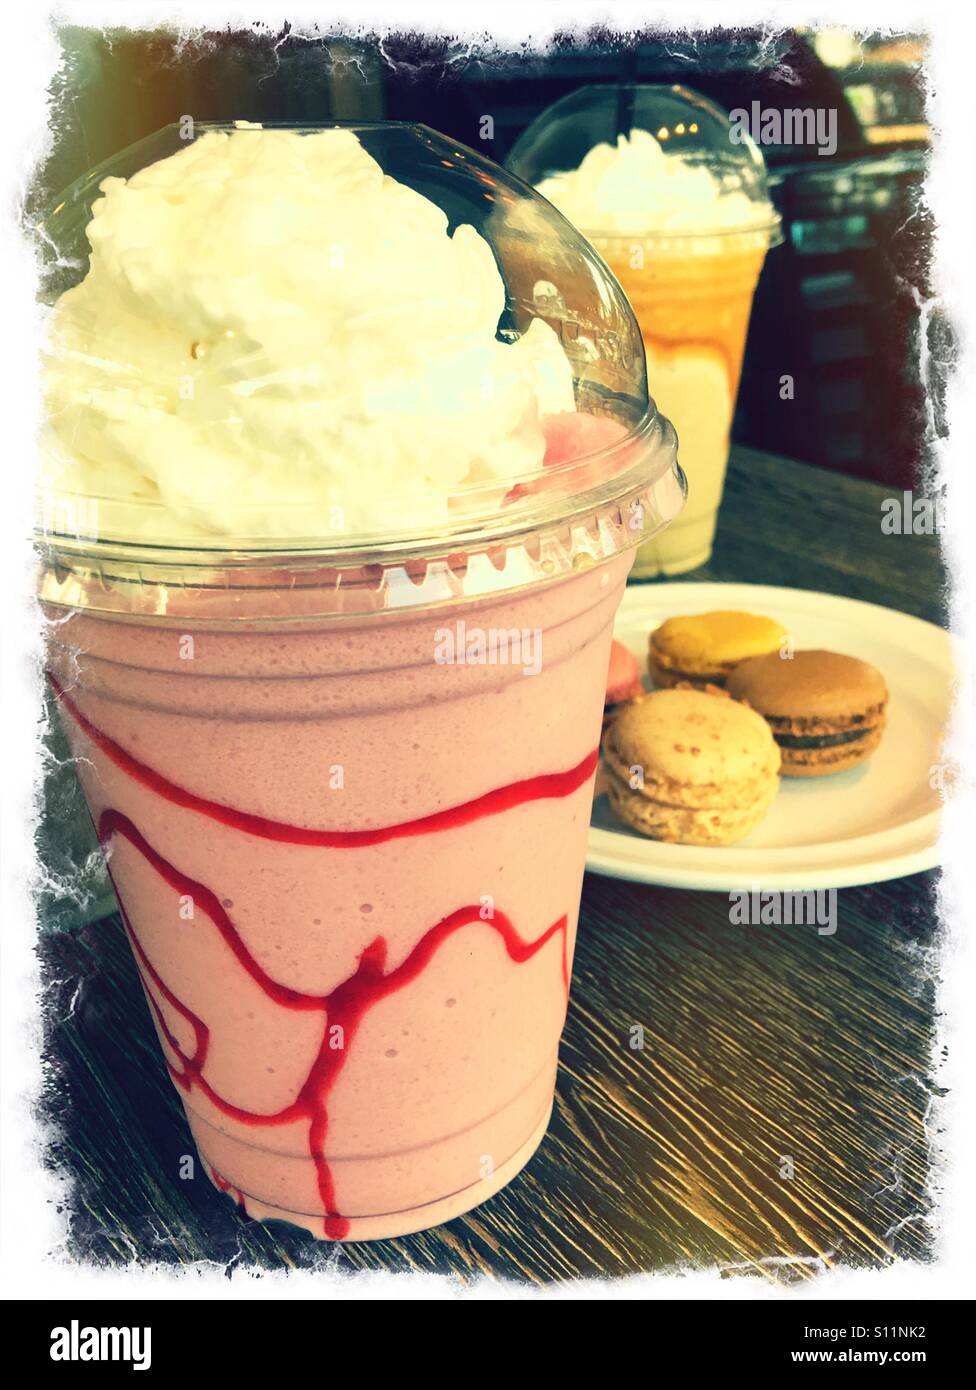 A strawberry frappe with French macarons and a caramel frappe in the background. Stock Photo